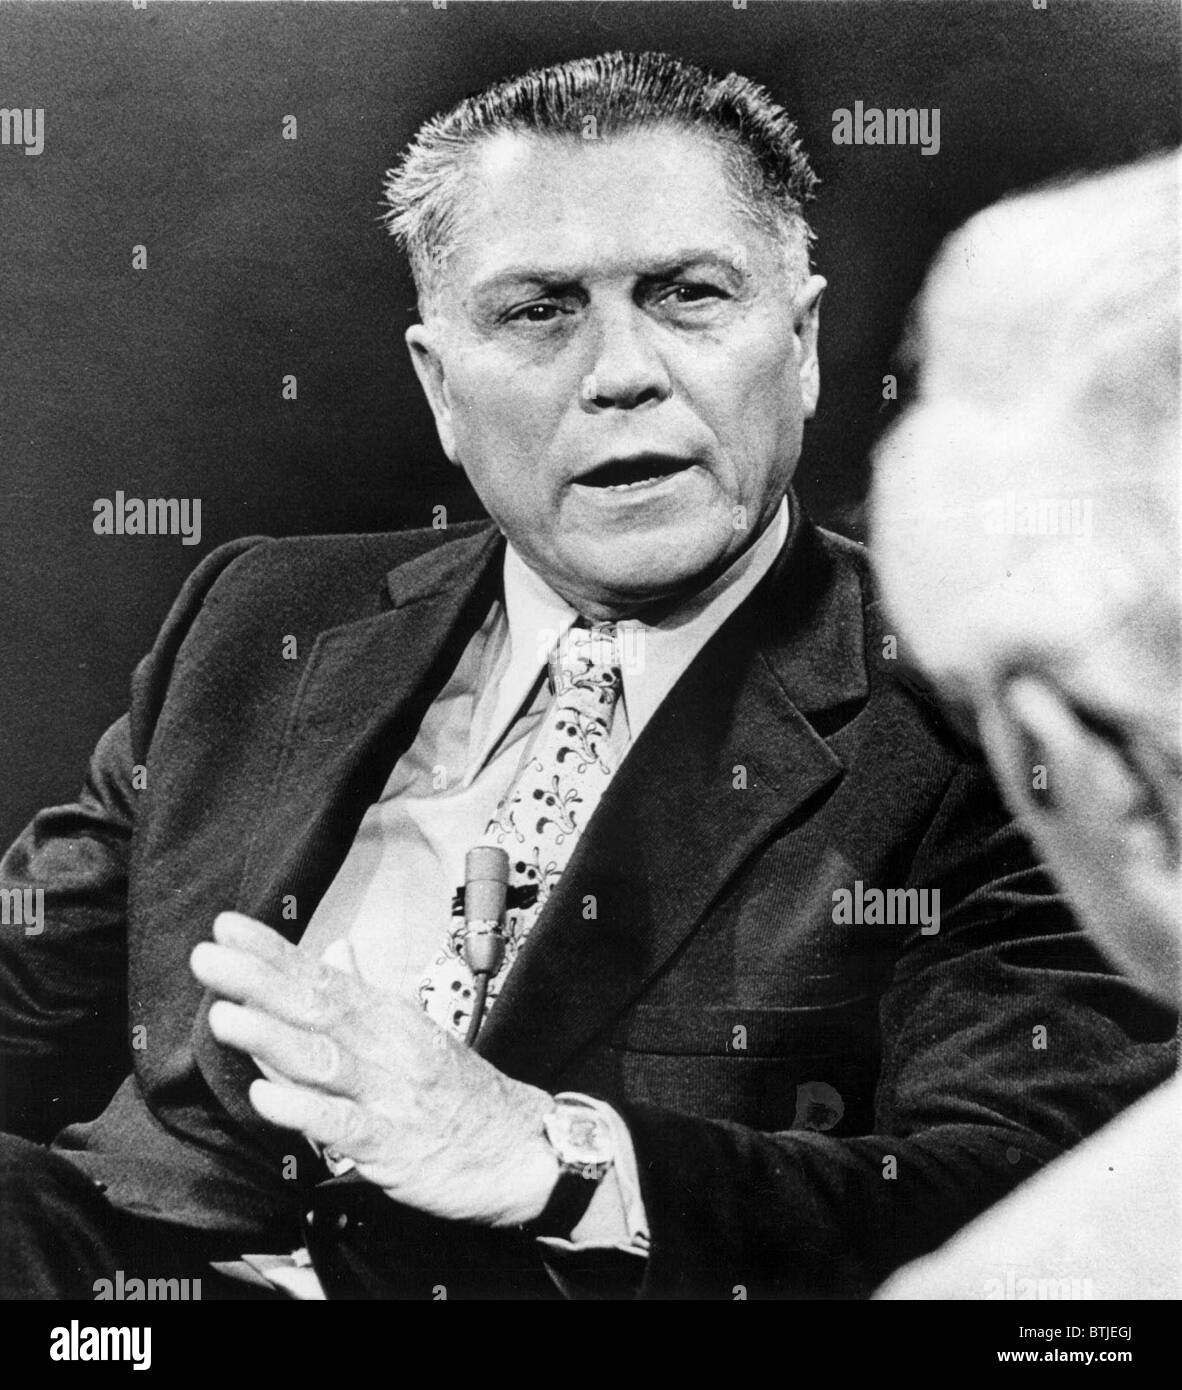 JAMES R. HOFFA-Former Teamsters Union president during a television inteview endorsing President Nixon for re-election. 2/13/72 Stock Photo